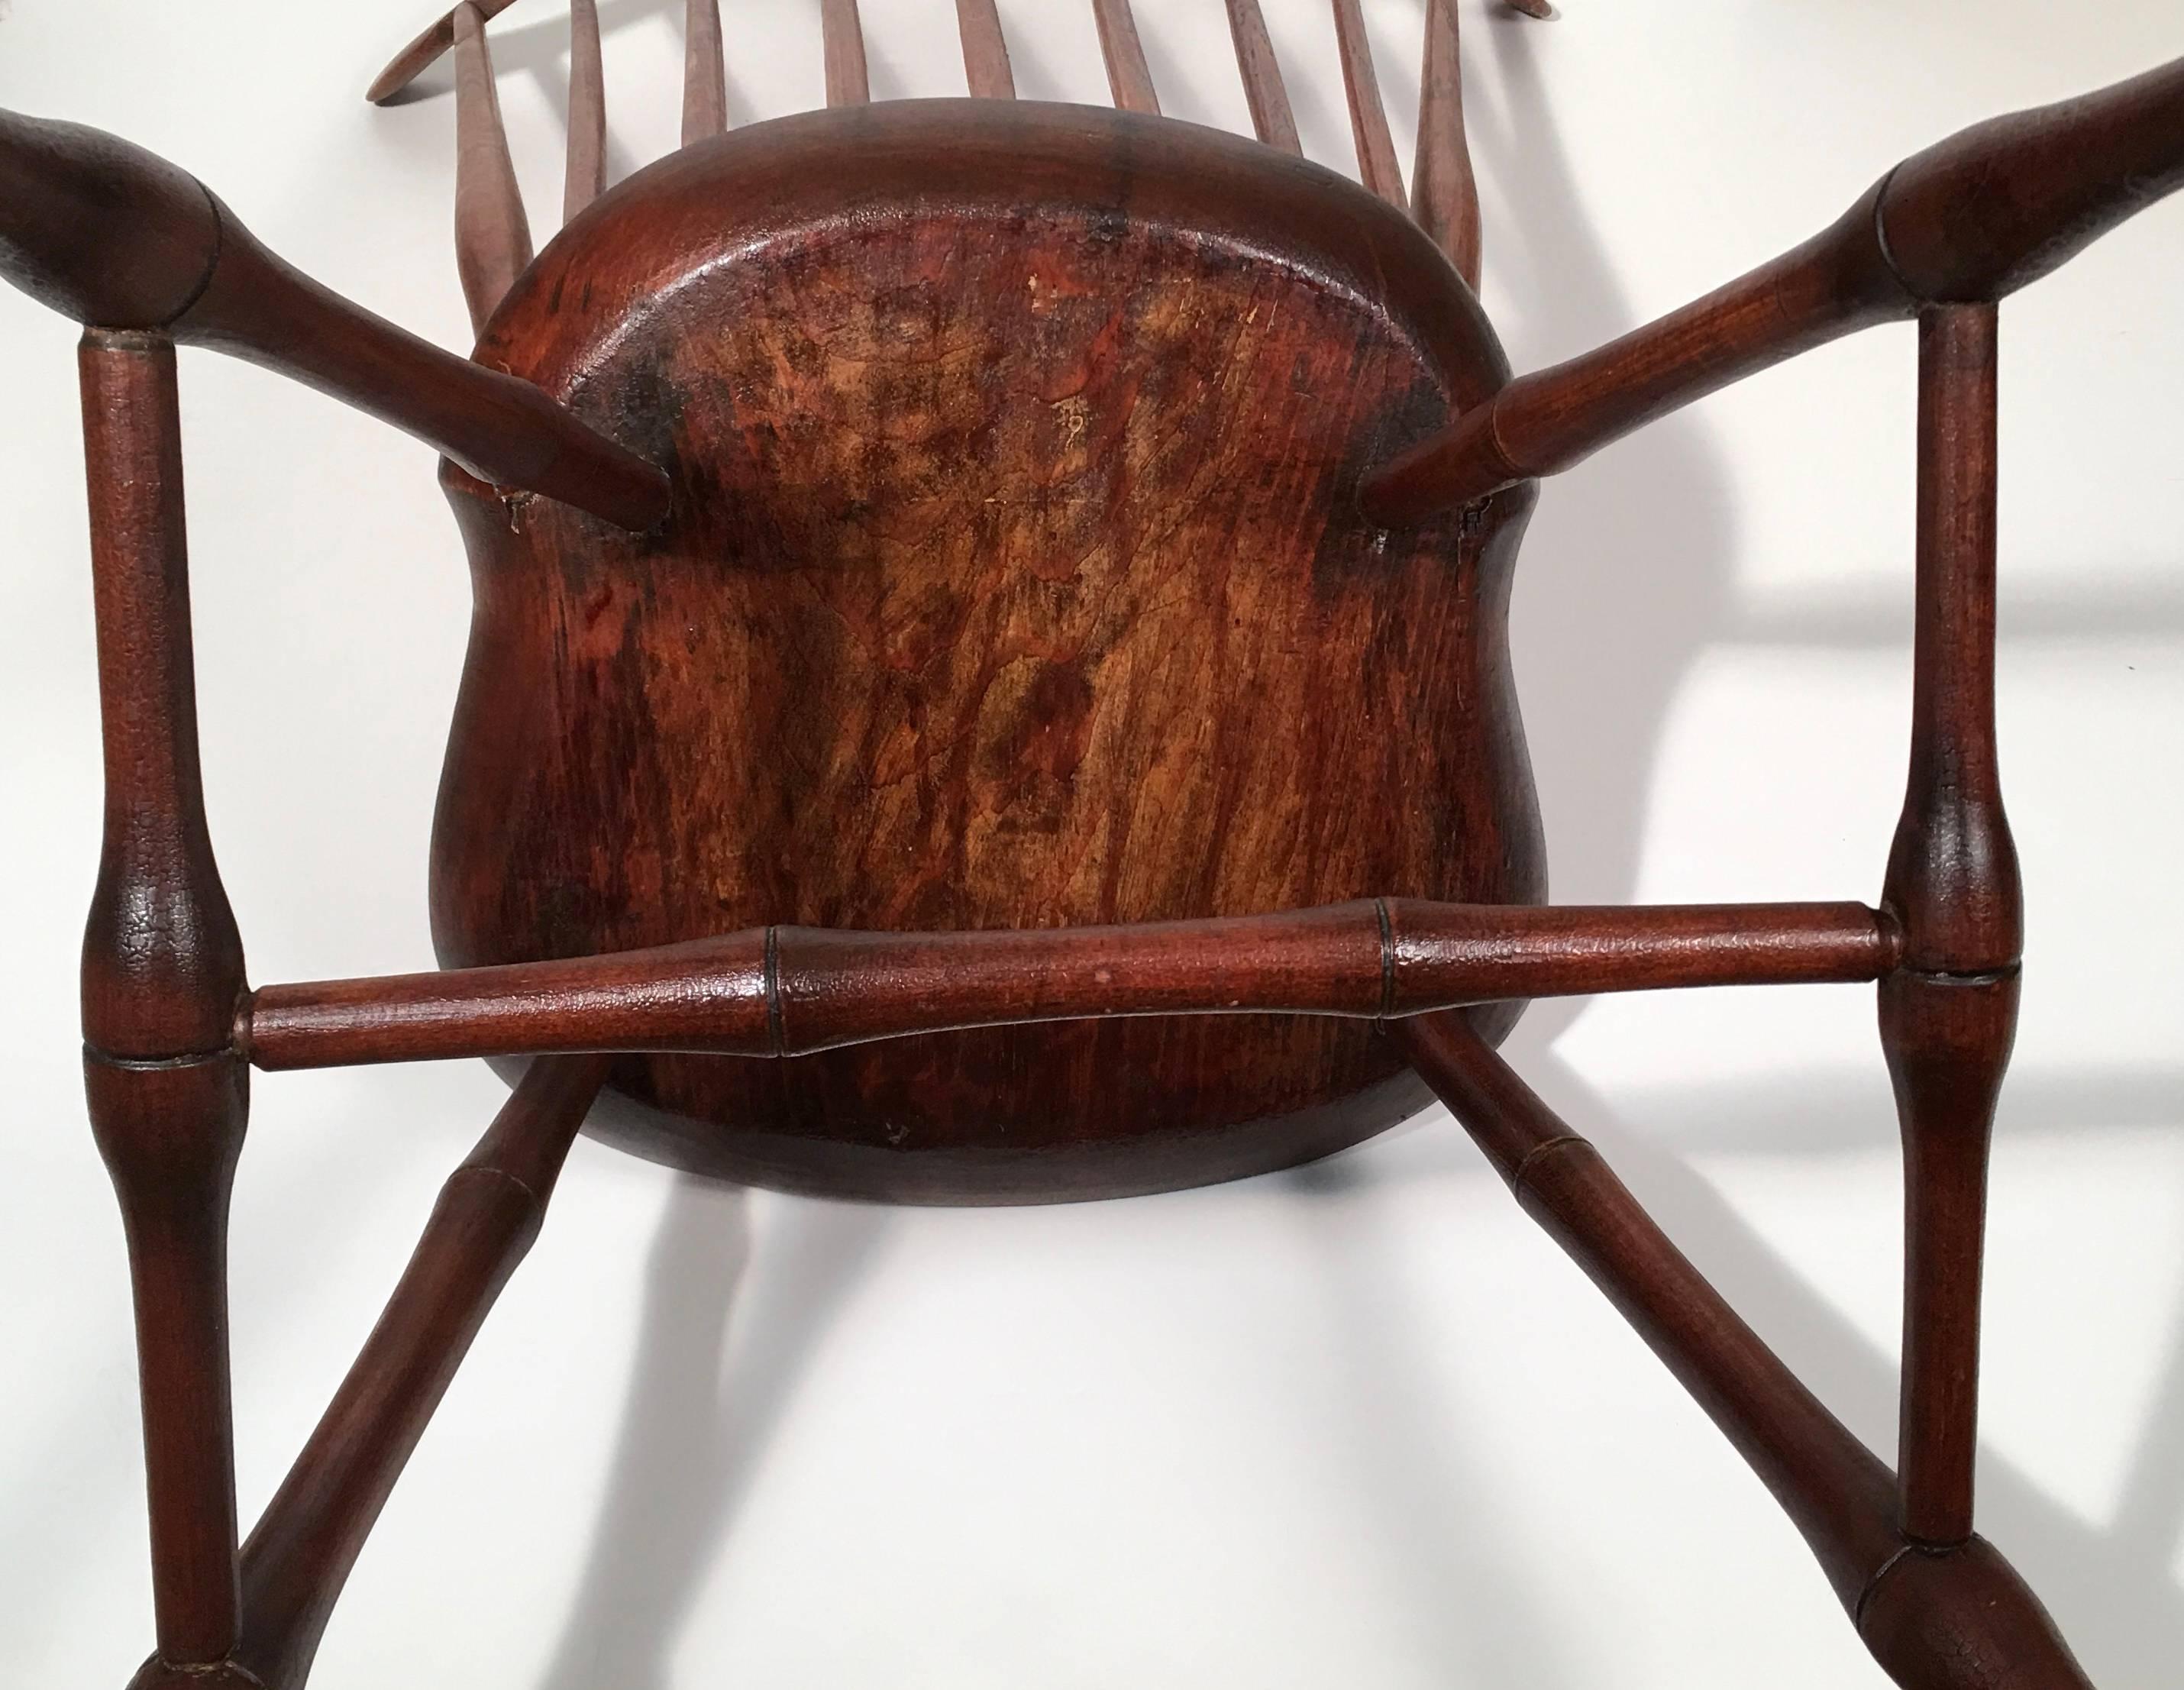 19th Century Uncommon New Hampshire Windsor Chair